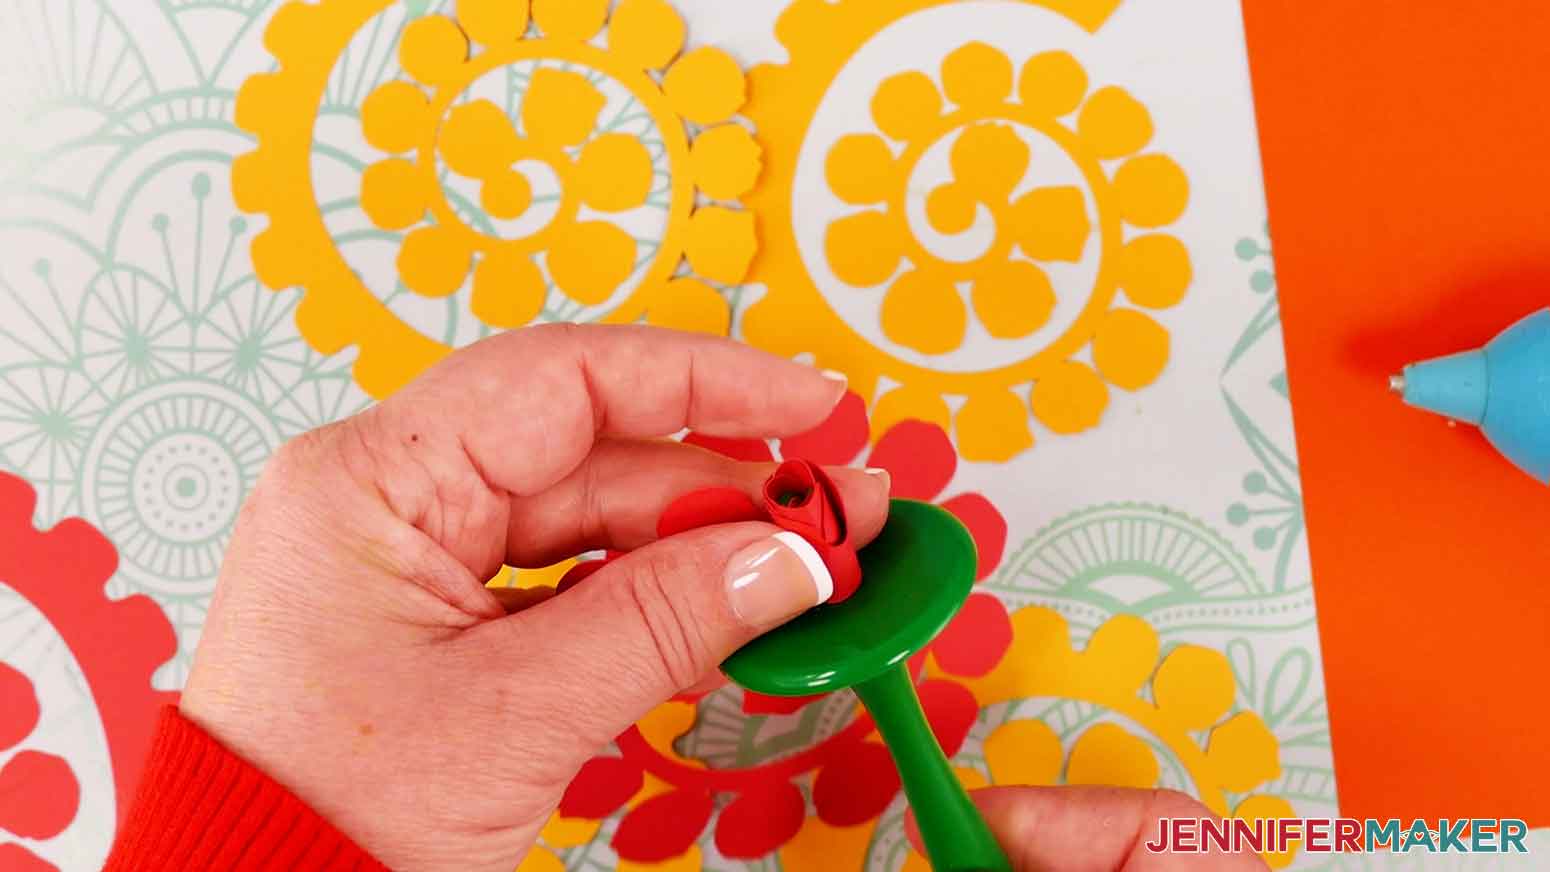 Jennifer is using the Flowtool to roll red, orange, and yellow paper roses.